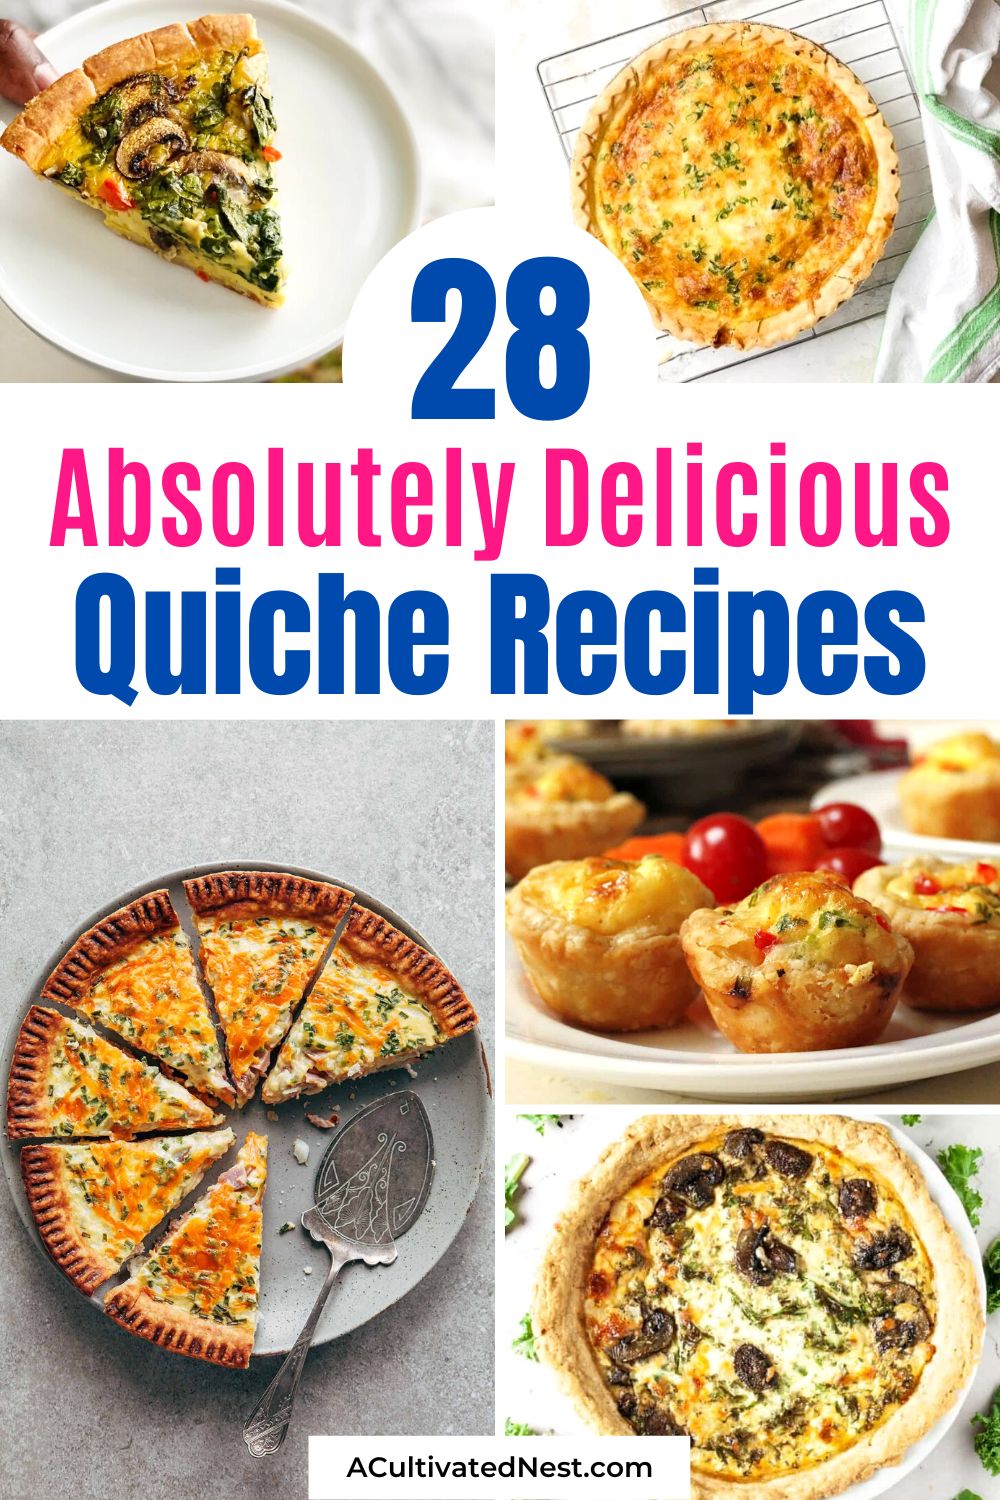 28 Delicious Quiche Recipes- Want an easy and delicious recipe for breakfast or lunch? Then you need to check out these tasty homemade quiche recipes! There are so many different delicious ways to make quiche! | #breakfastRecipes #recipes #quicheRecipes #eggRecipes #ACultivatedNest